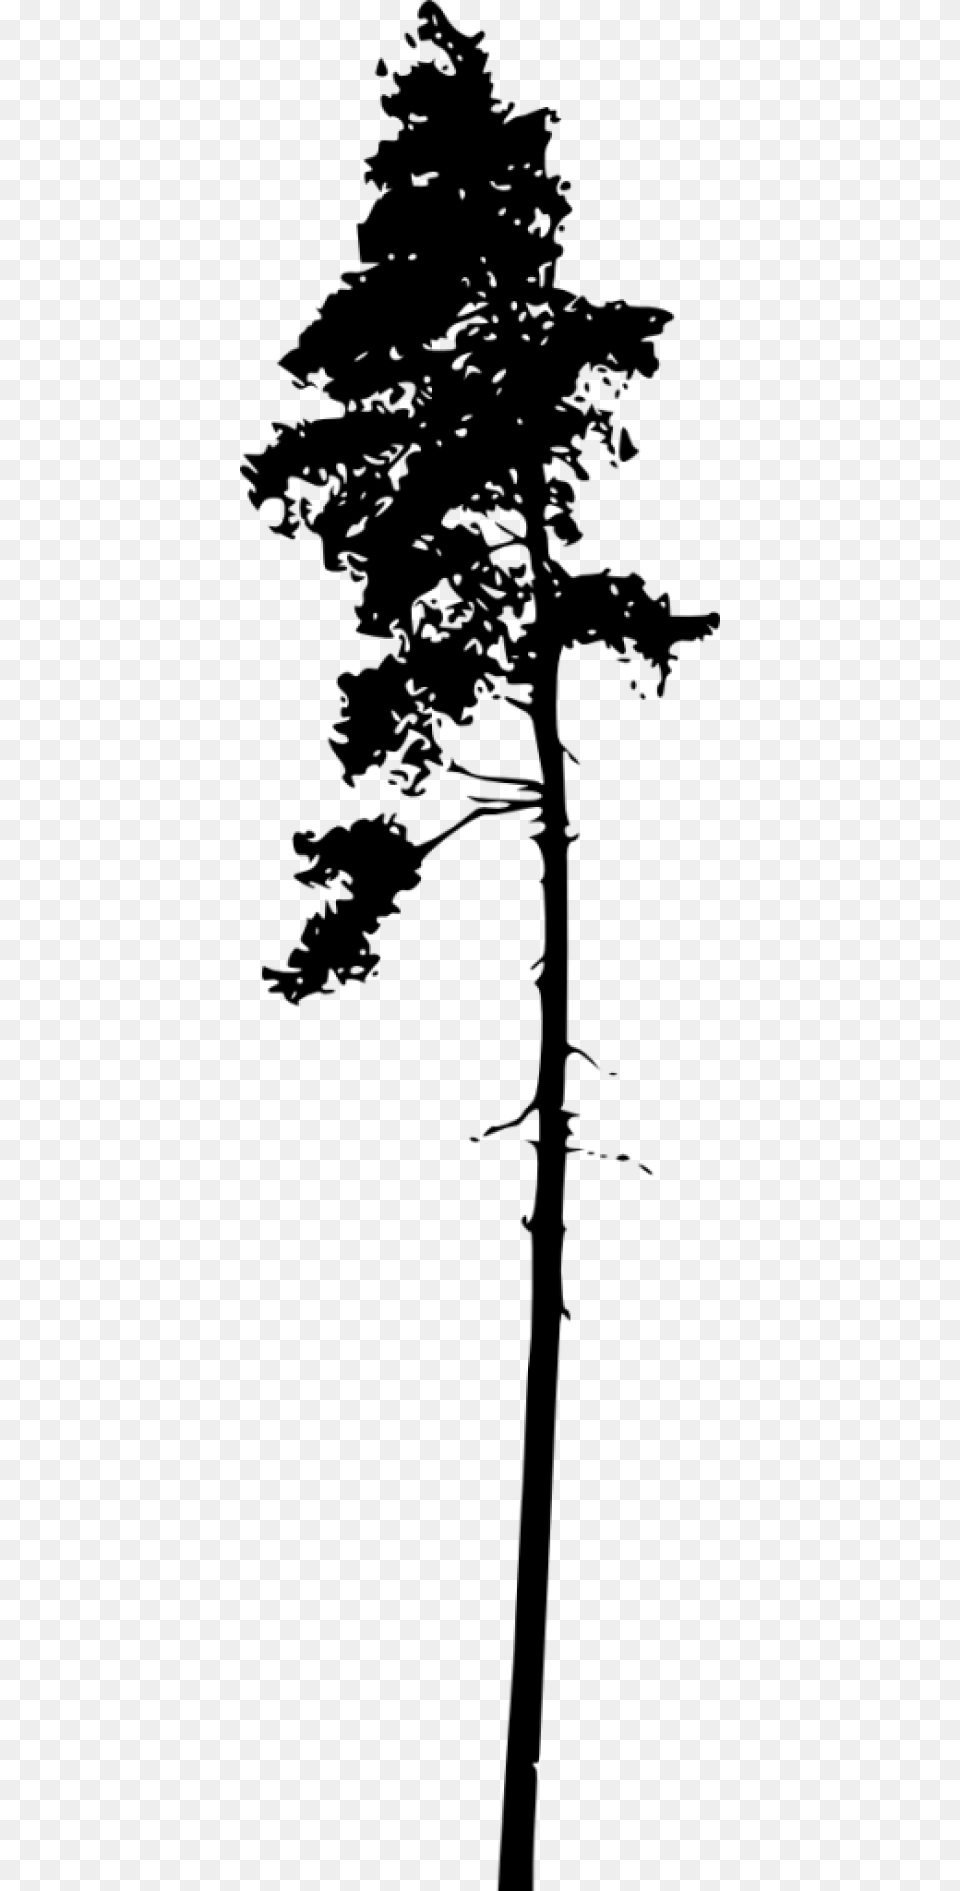 File Size Portable Network Graphics, Plant, Silhouette, Tree, Tree Trunk Png